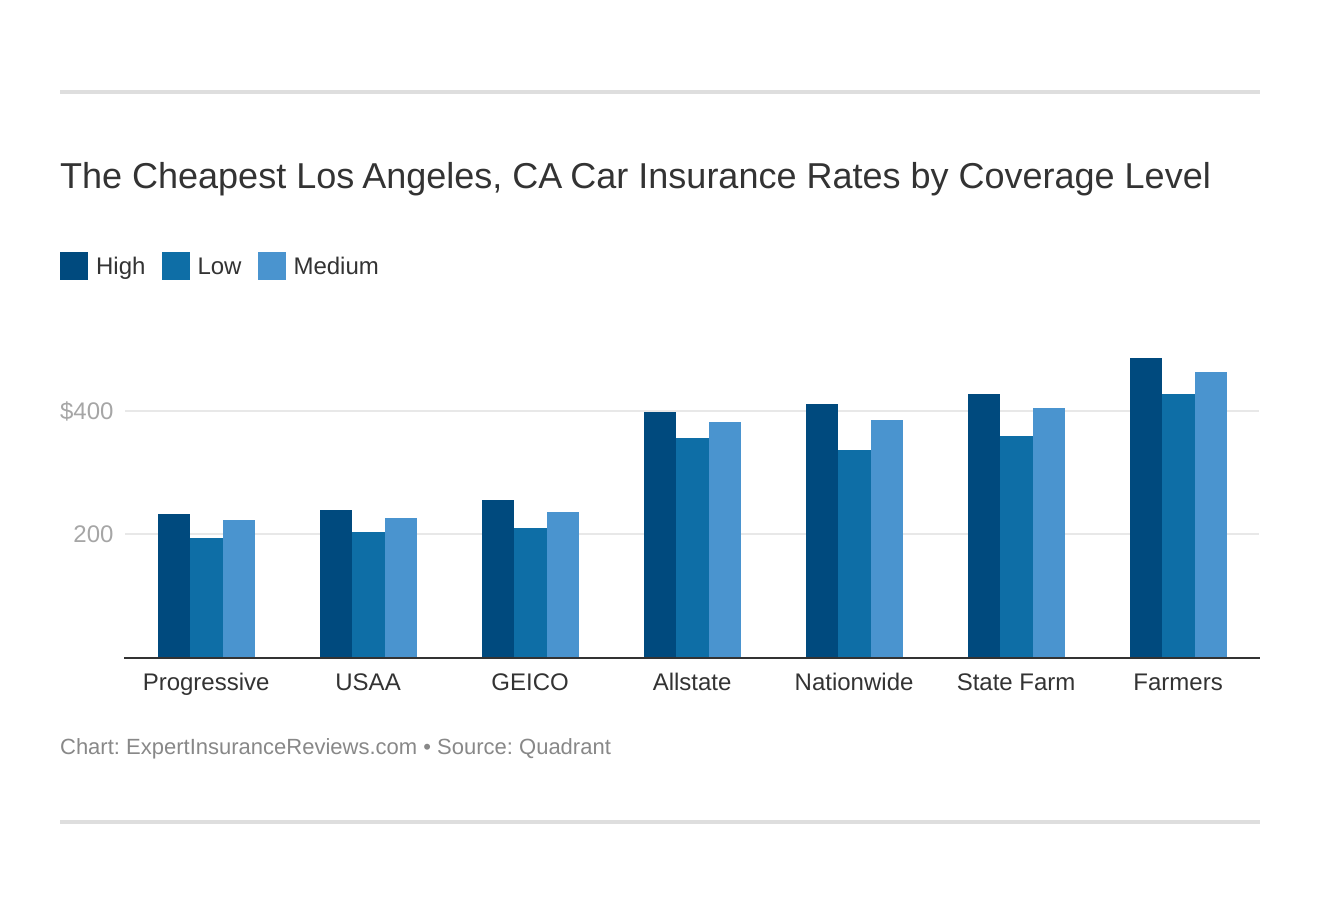 The Cheapest Los Angeles, CA Car Insurance Rates by Coverage Level